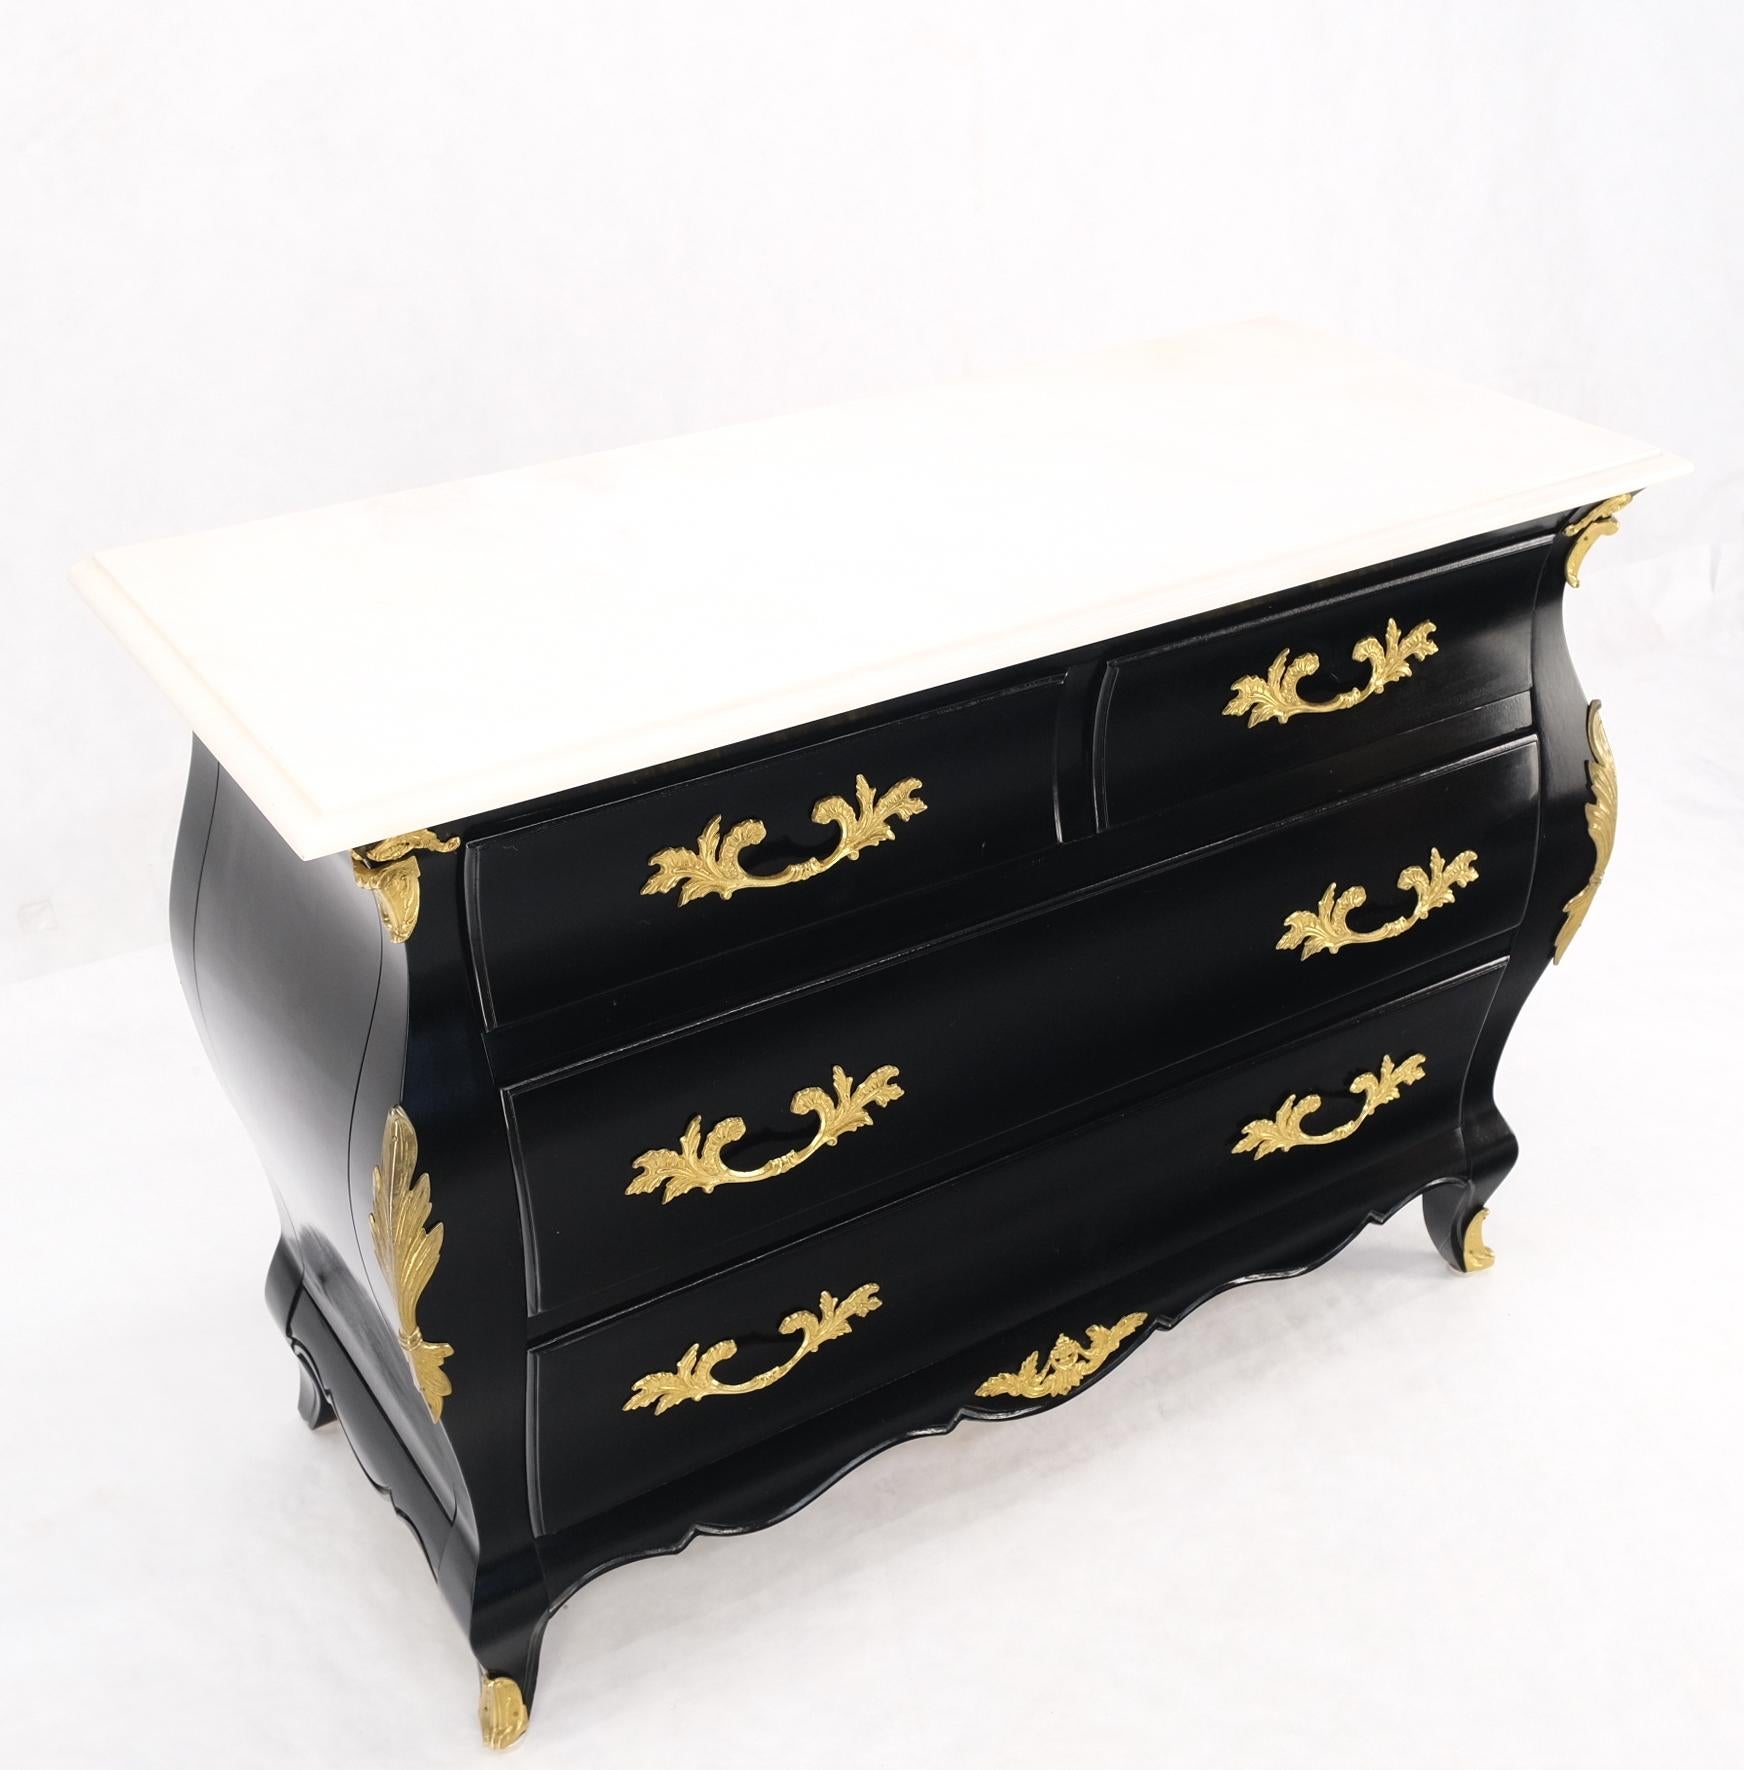 Marble Top Black Lacquer Brass Mounts 4 Drawer Bombay Dresser Chest Drawers Mint For Sale 6